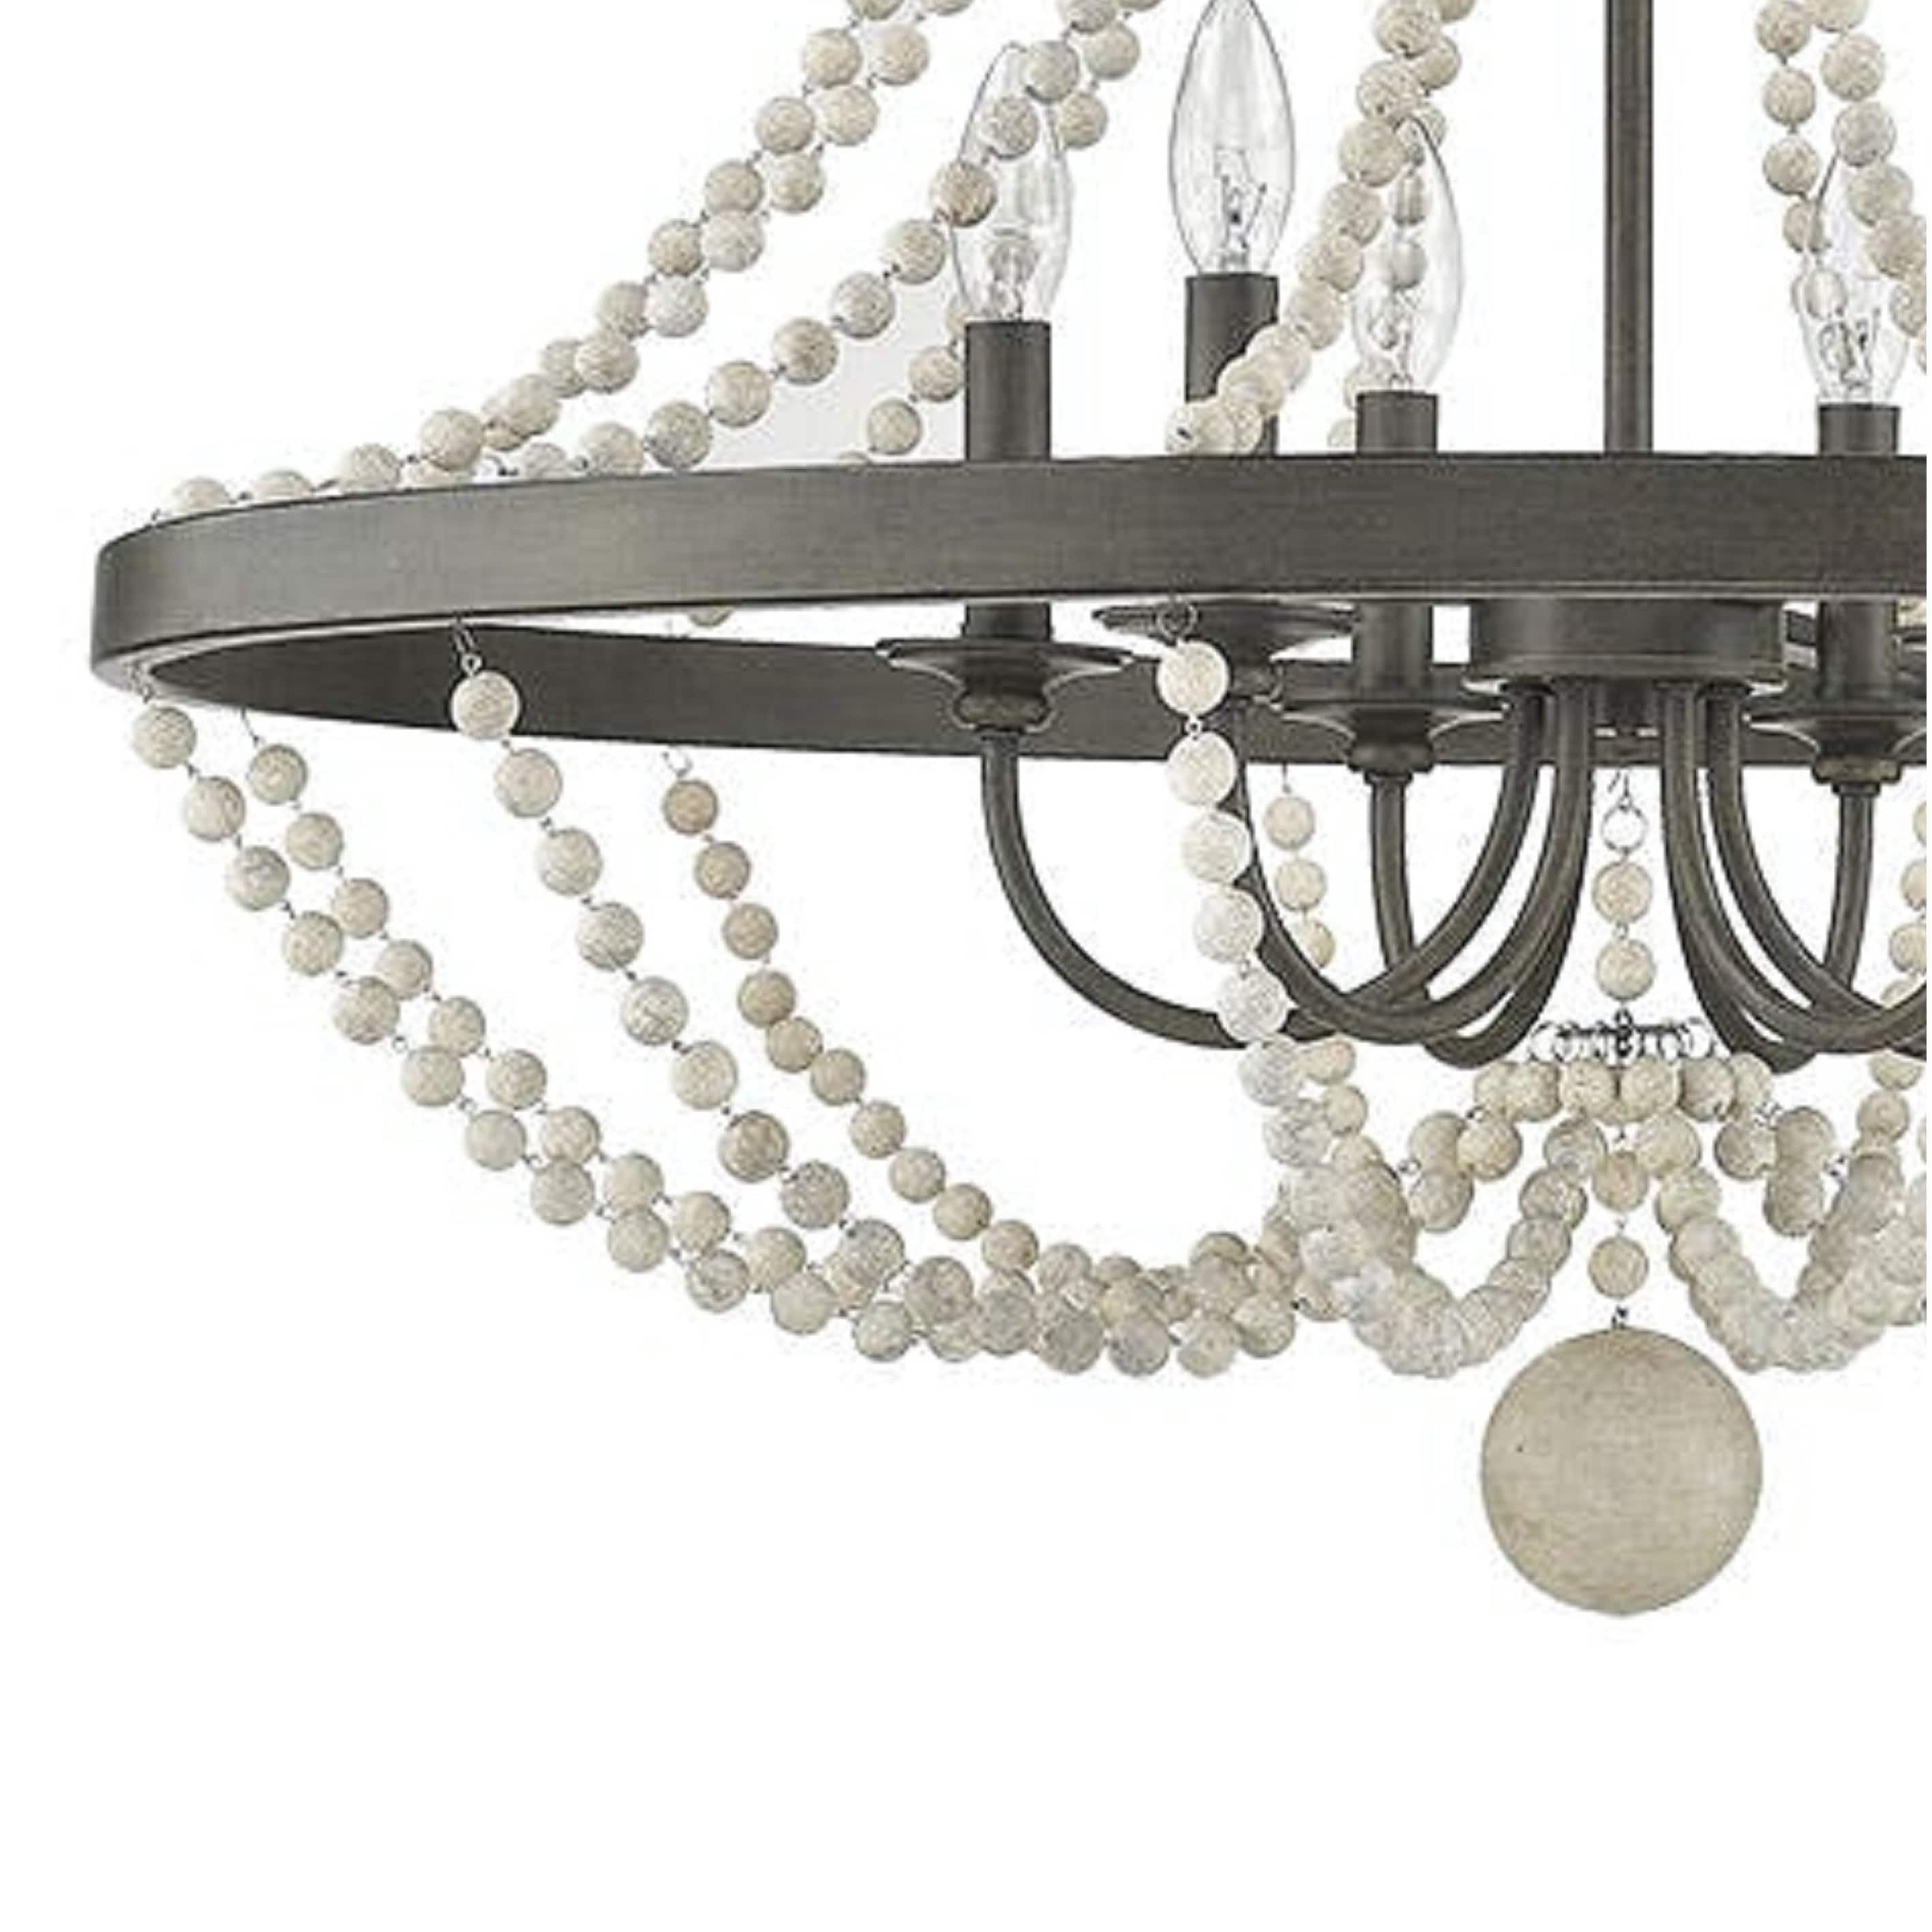 6-Light Wagon Wheel Chandelier with White beads and Bronze Finish Bed  Bath  Beyond 31796991